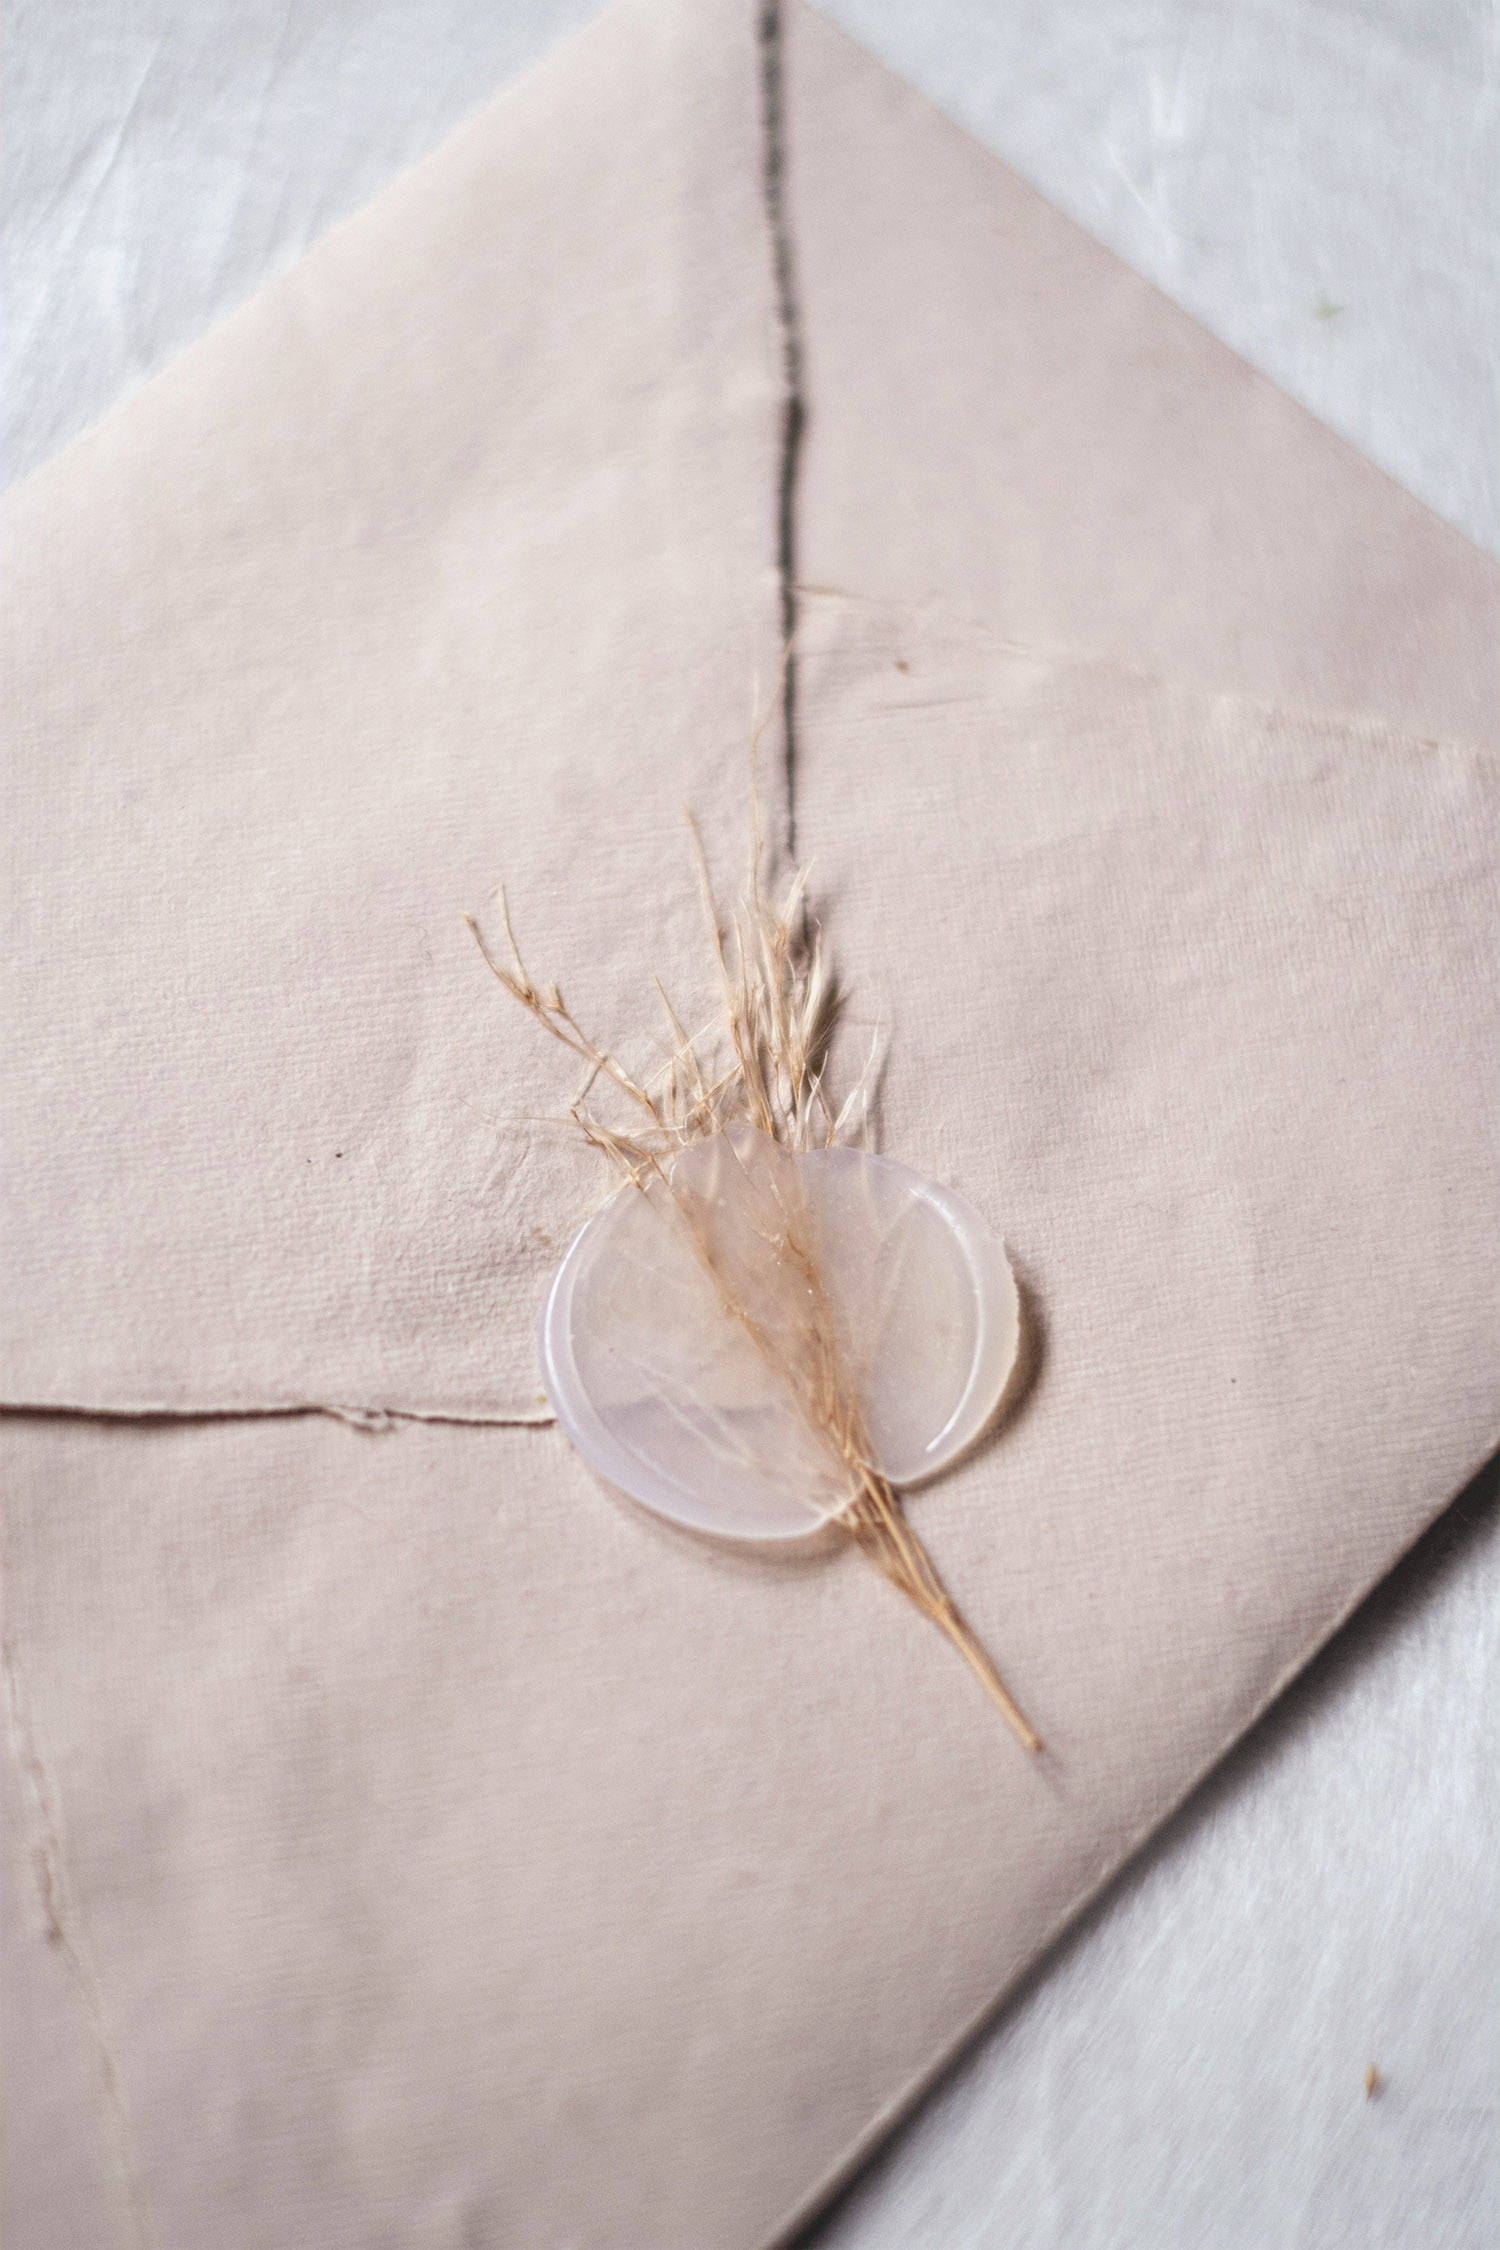 soft-touch-waxseals-with-dried-flowers-on-envelope